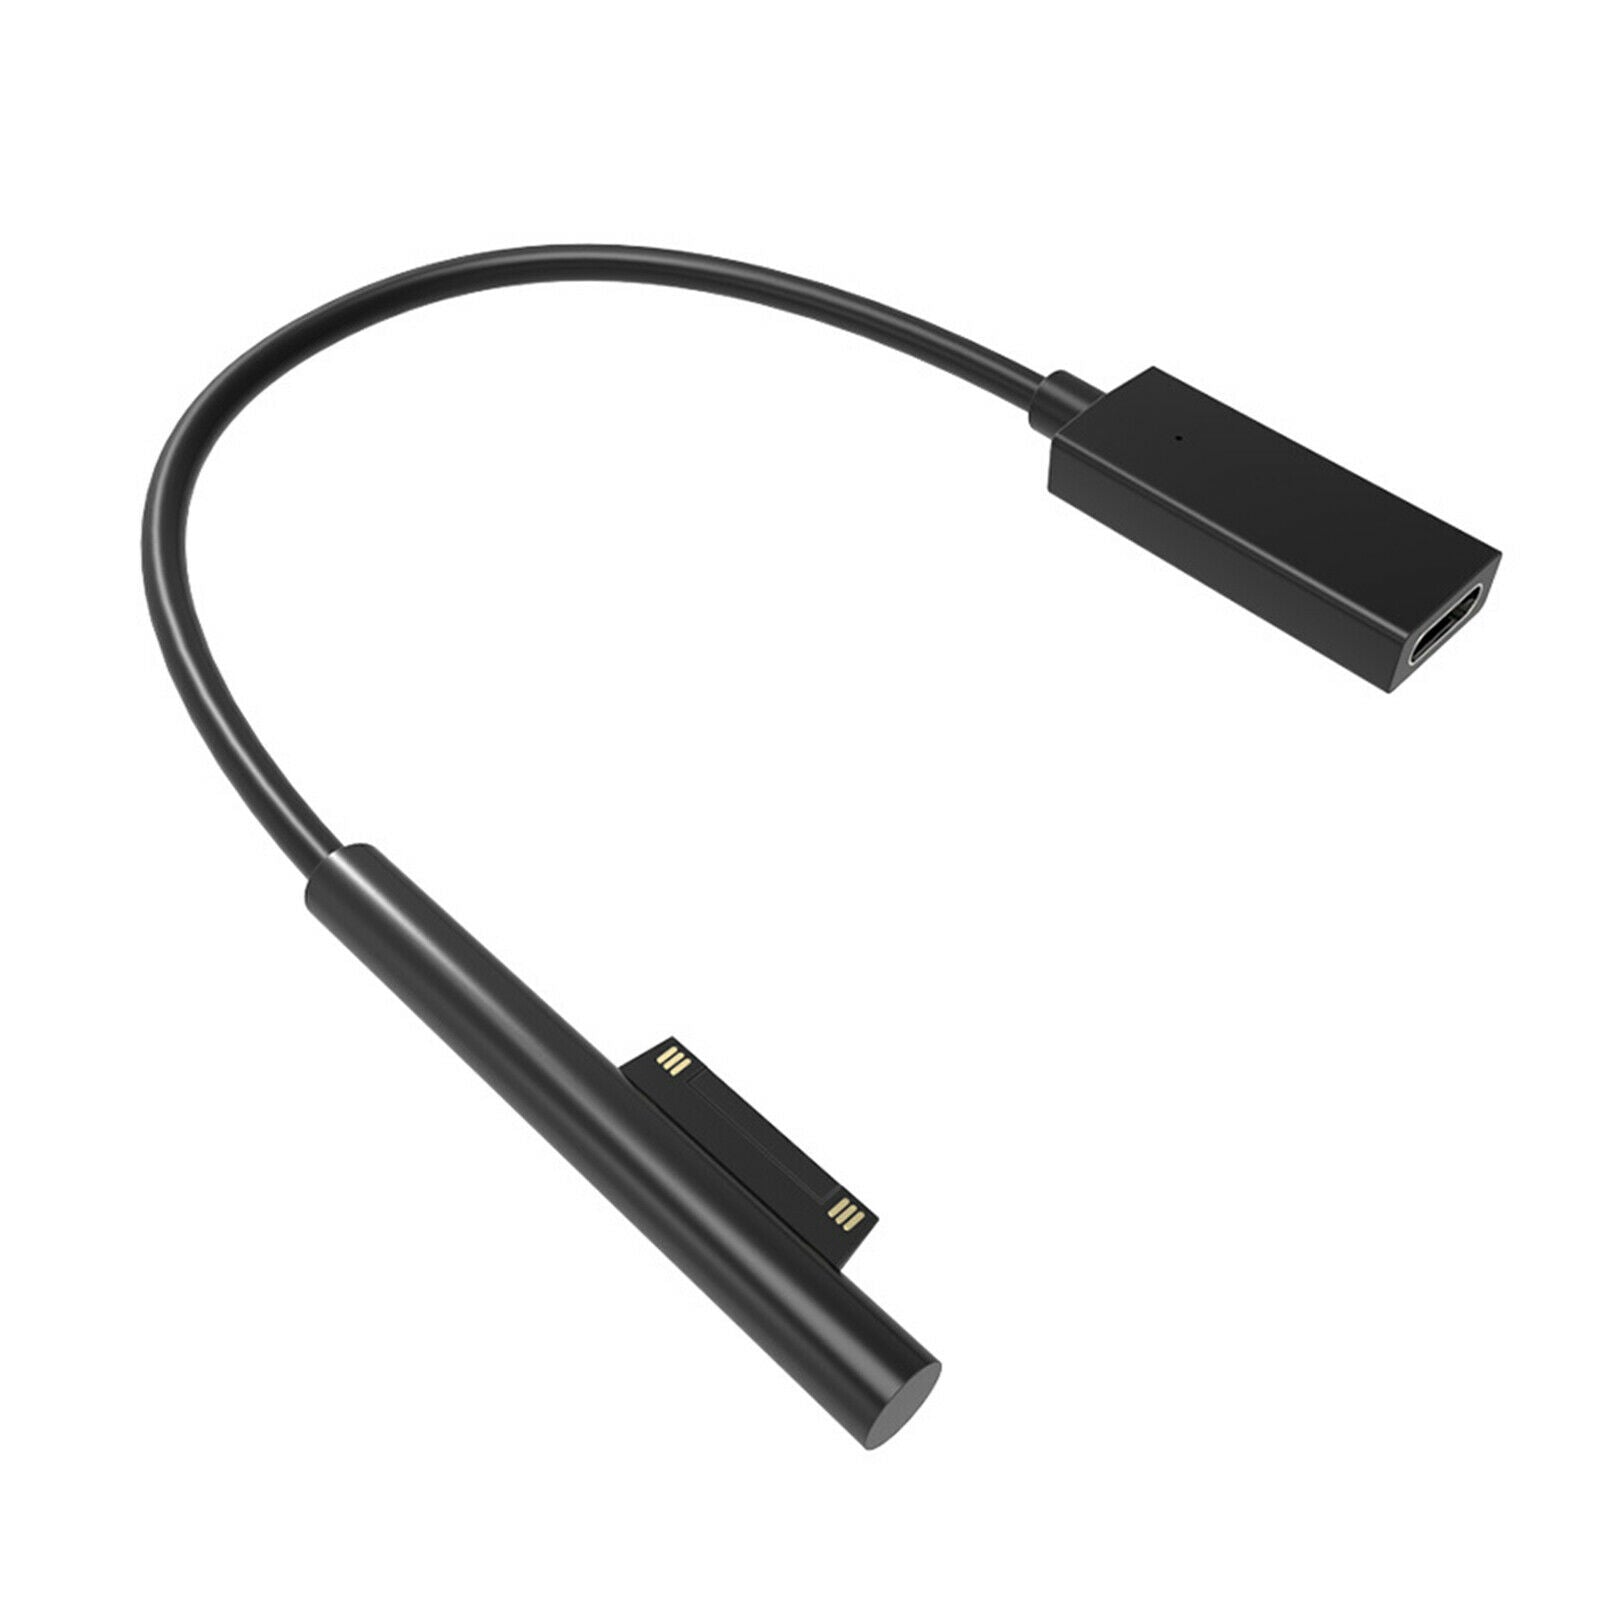 USB C Female Interface Adapter Connect Cord 15V for Microsoft Surface 6 GO